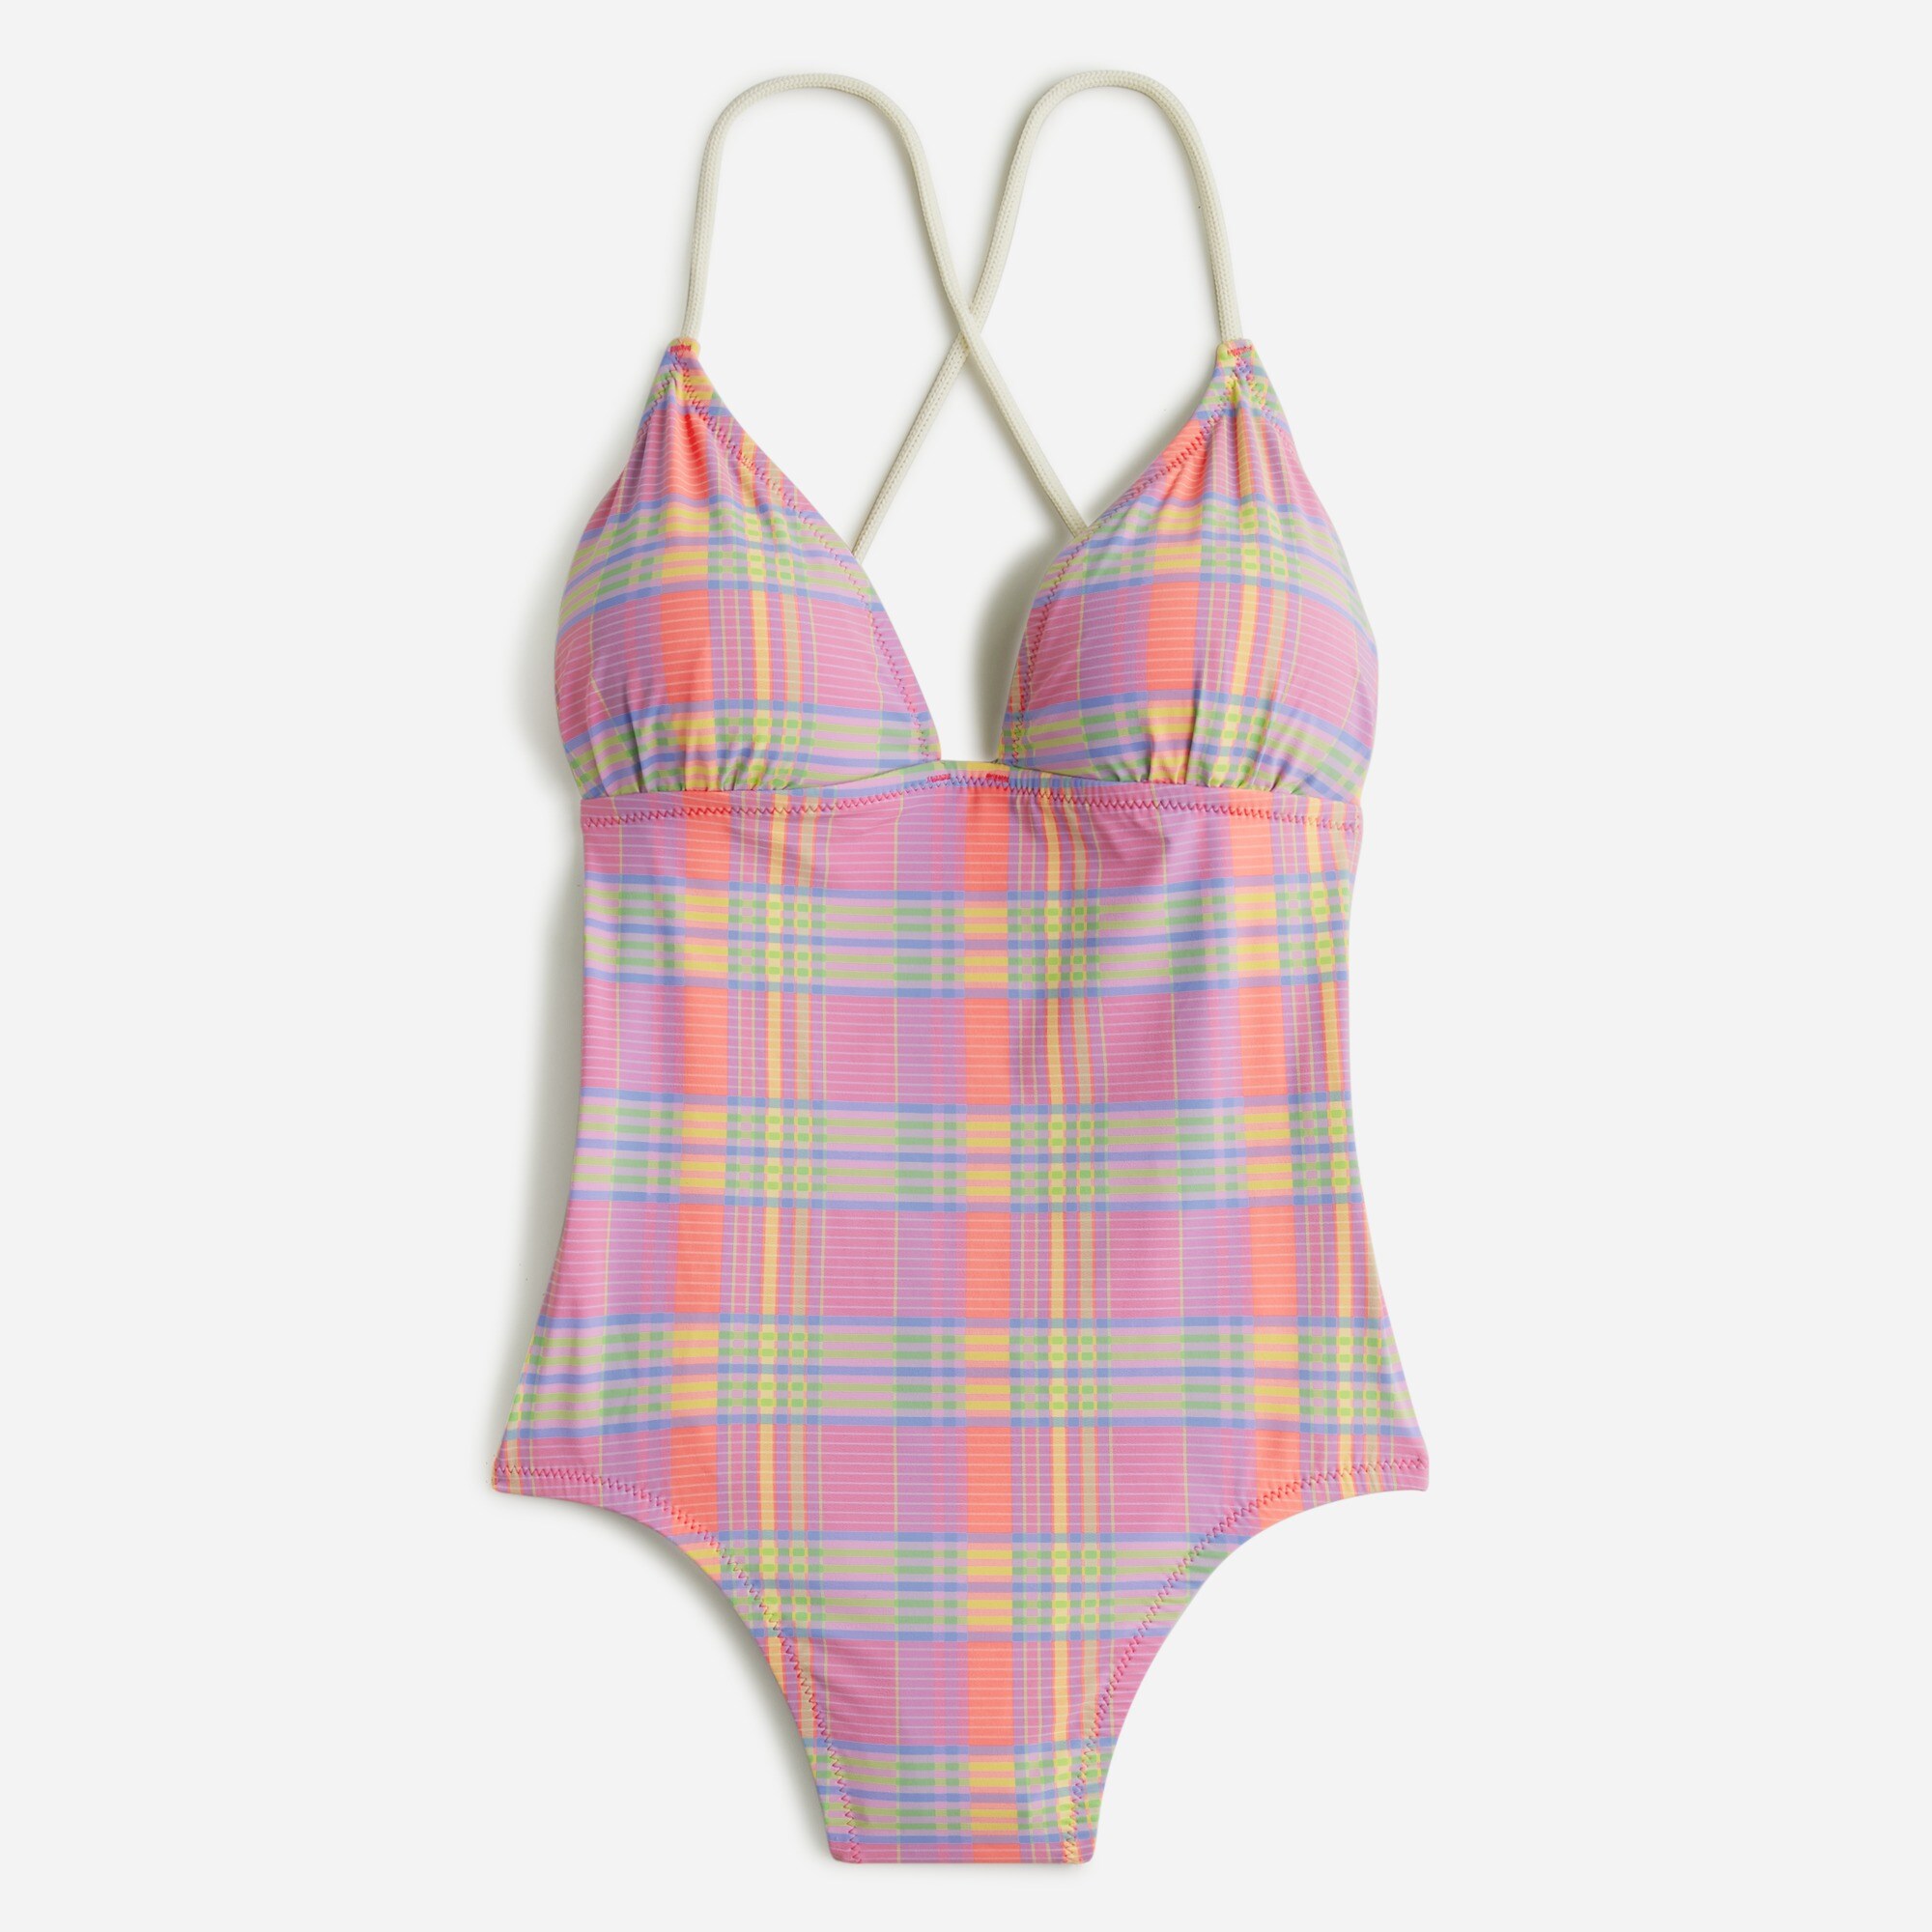  Strappy cross-back one-piece swimsuit in sunset plaid